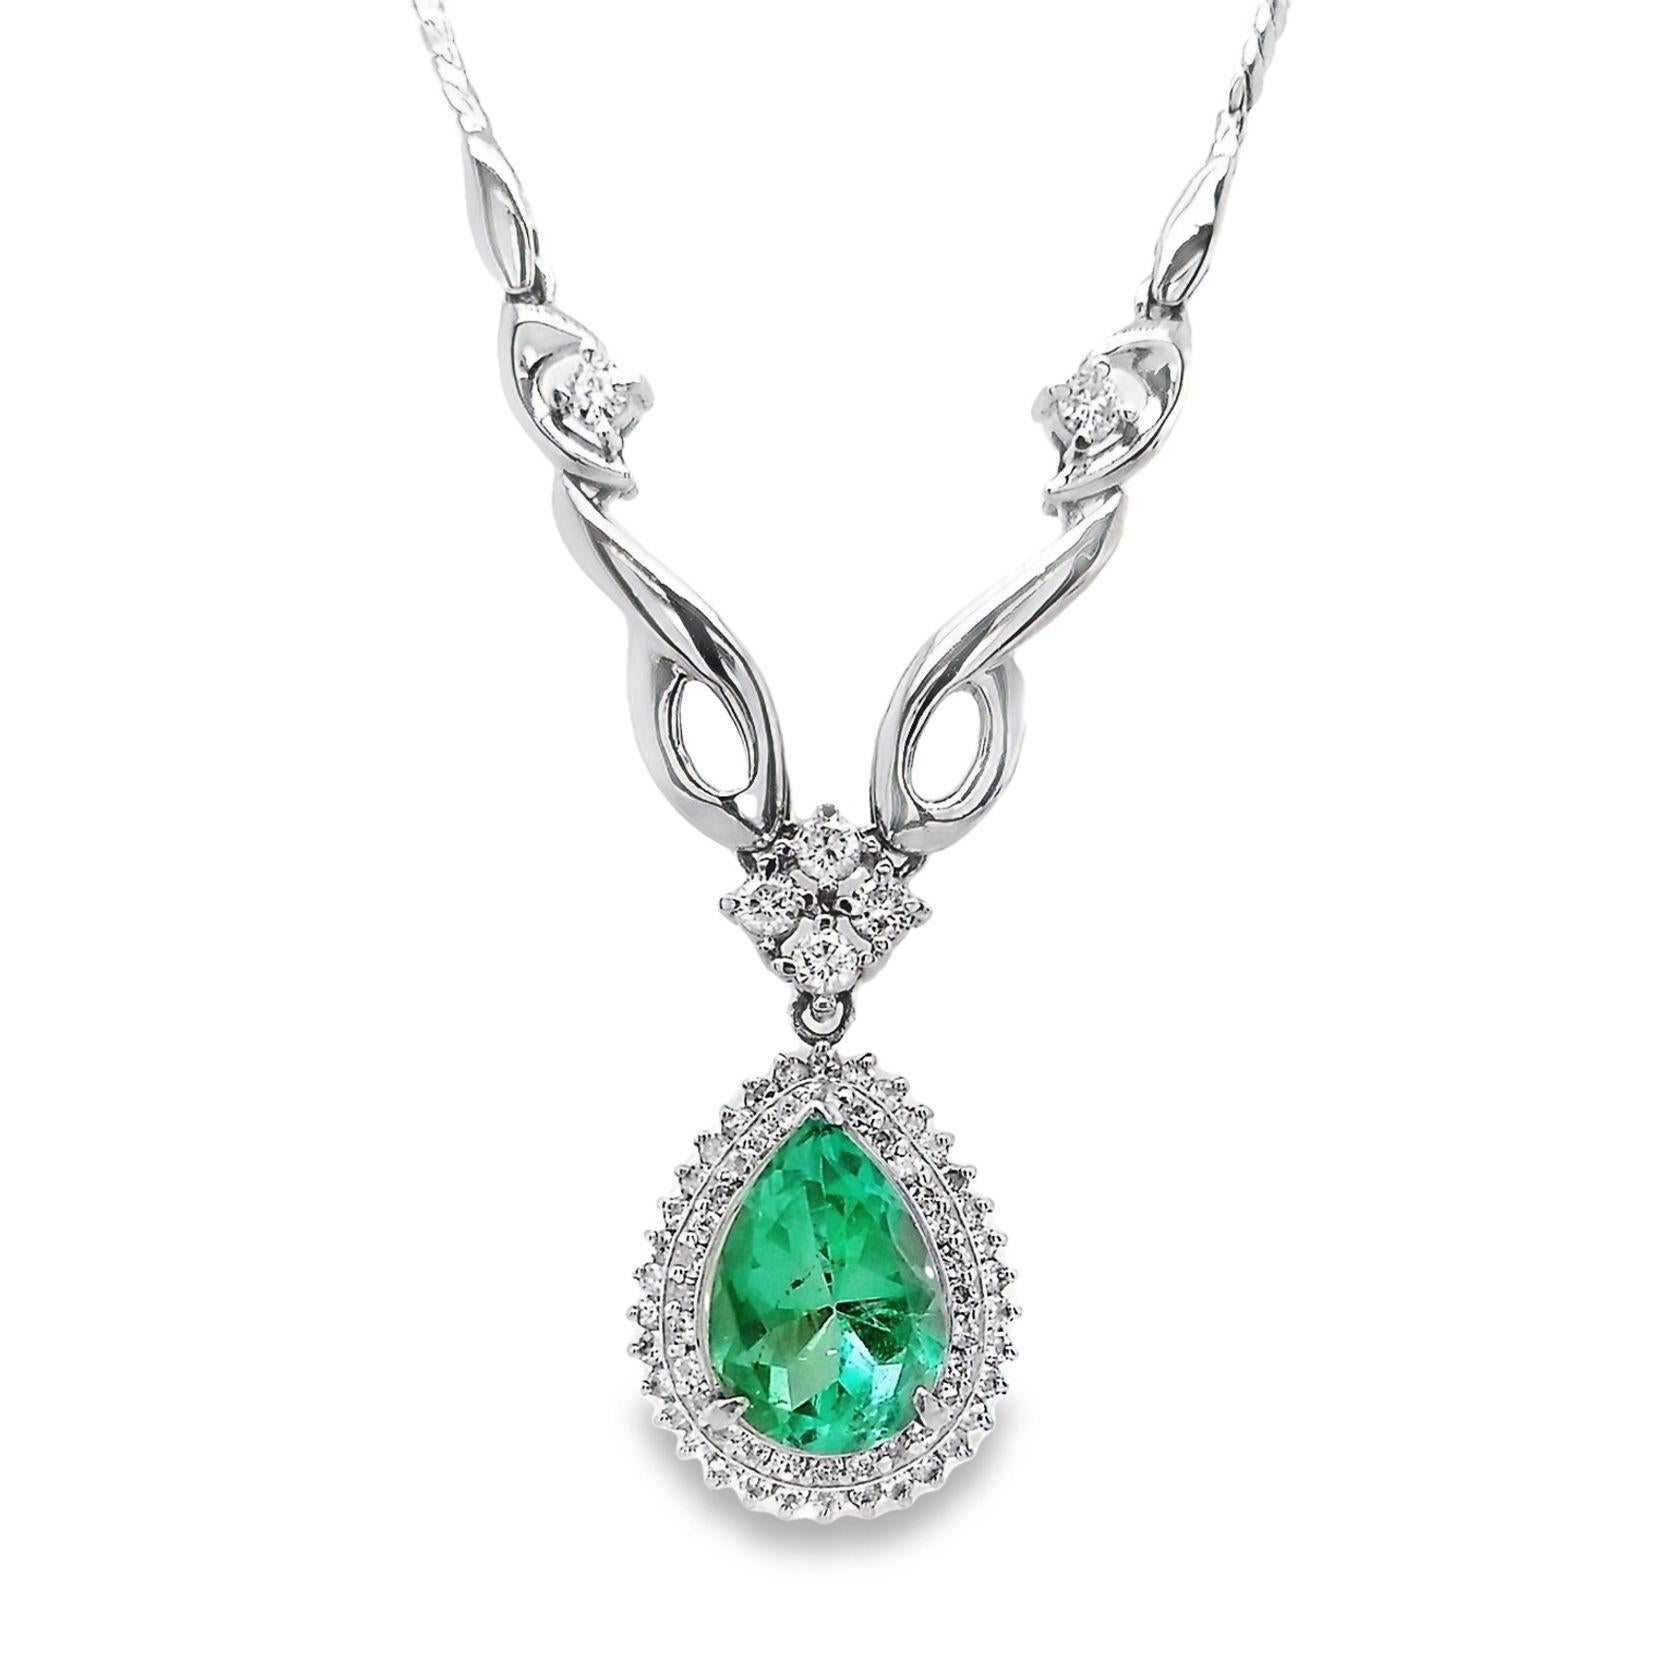 IGI Certified 2.51ct Colombia Emerald and 0.76ct Natural Diamonds Necklace For Sale